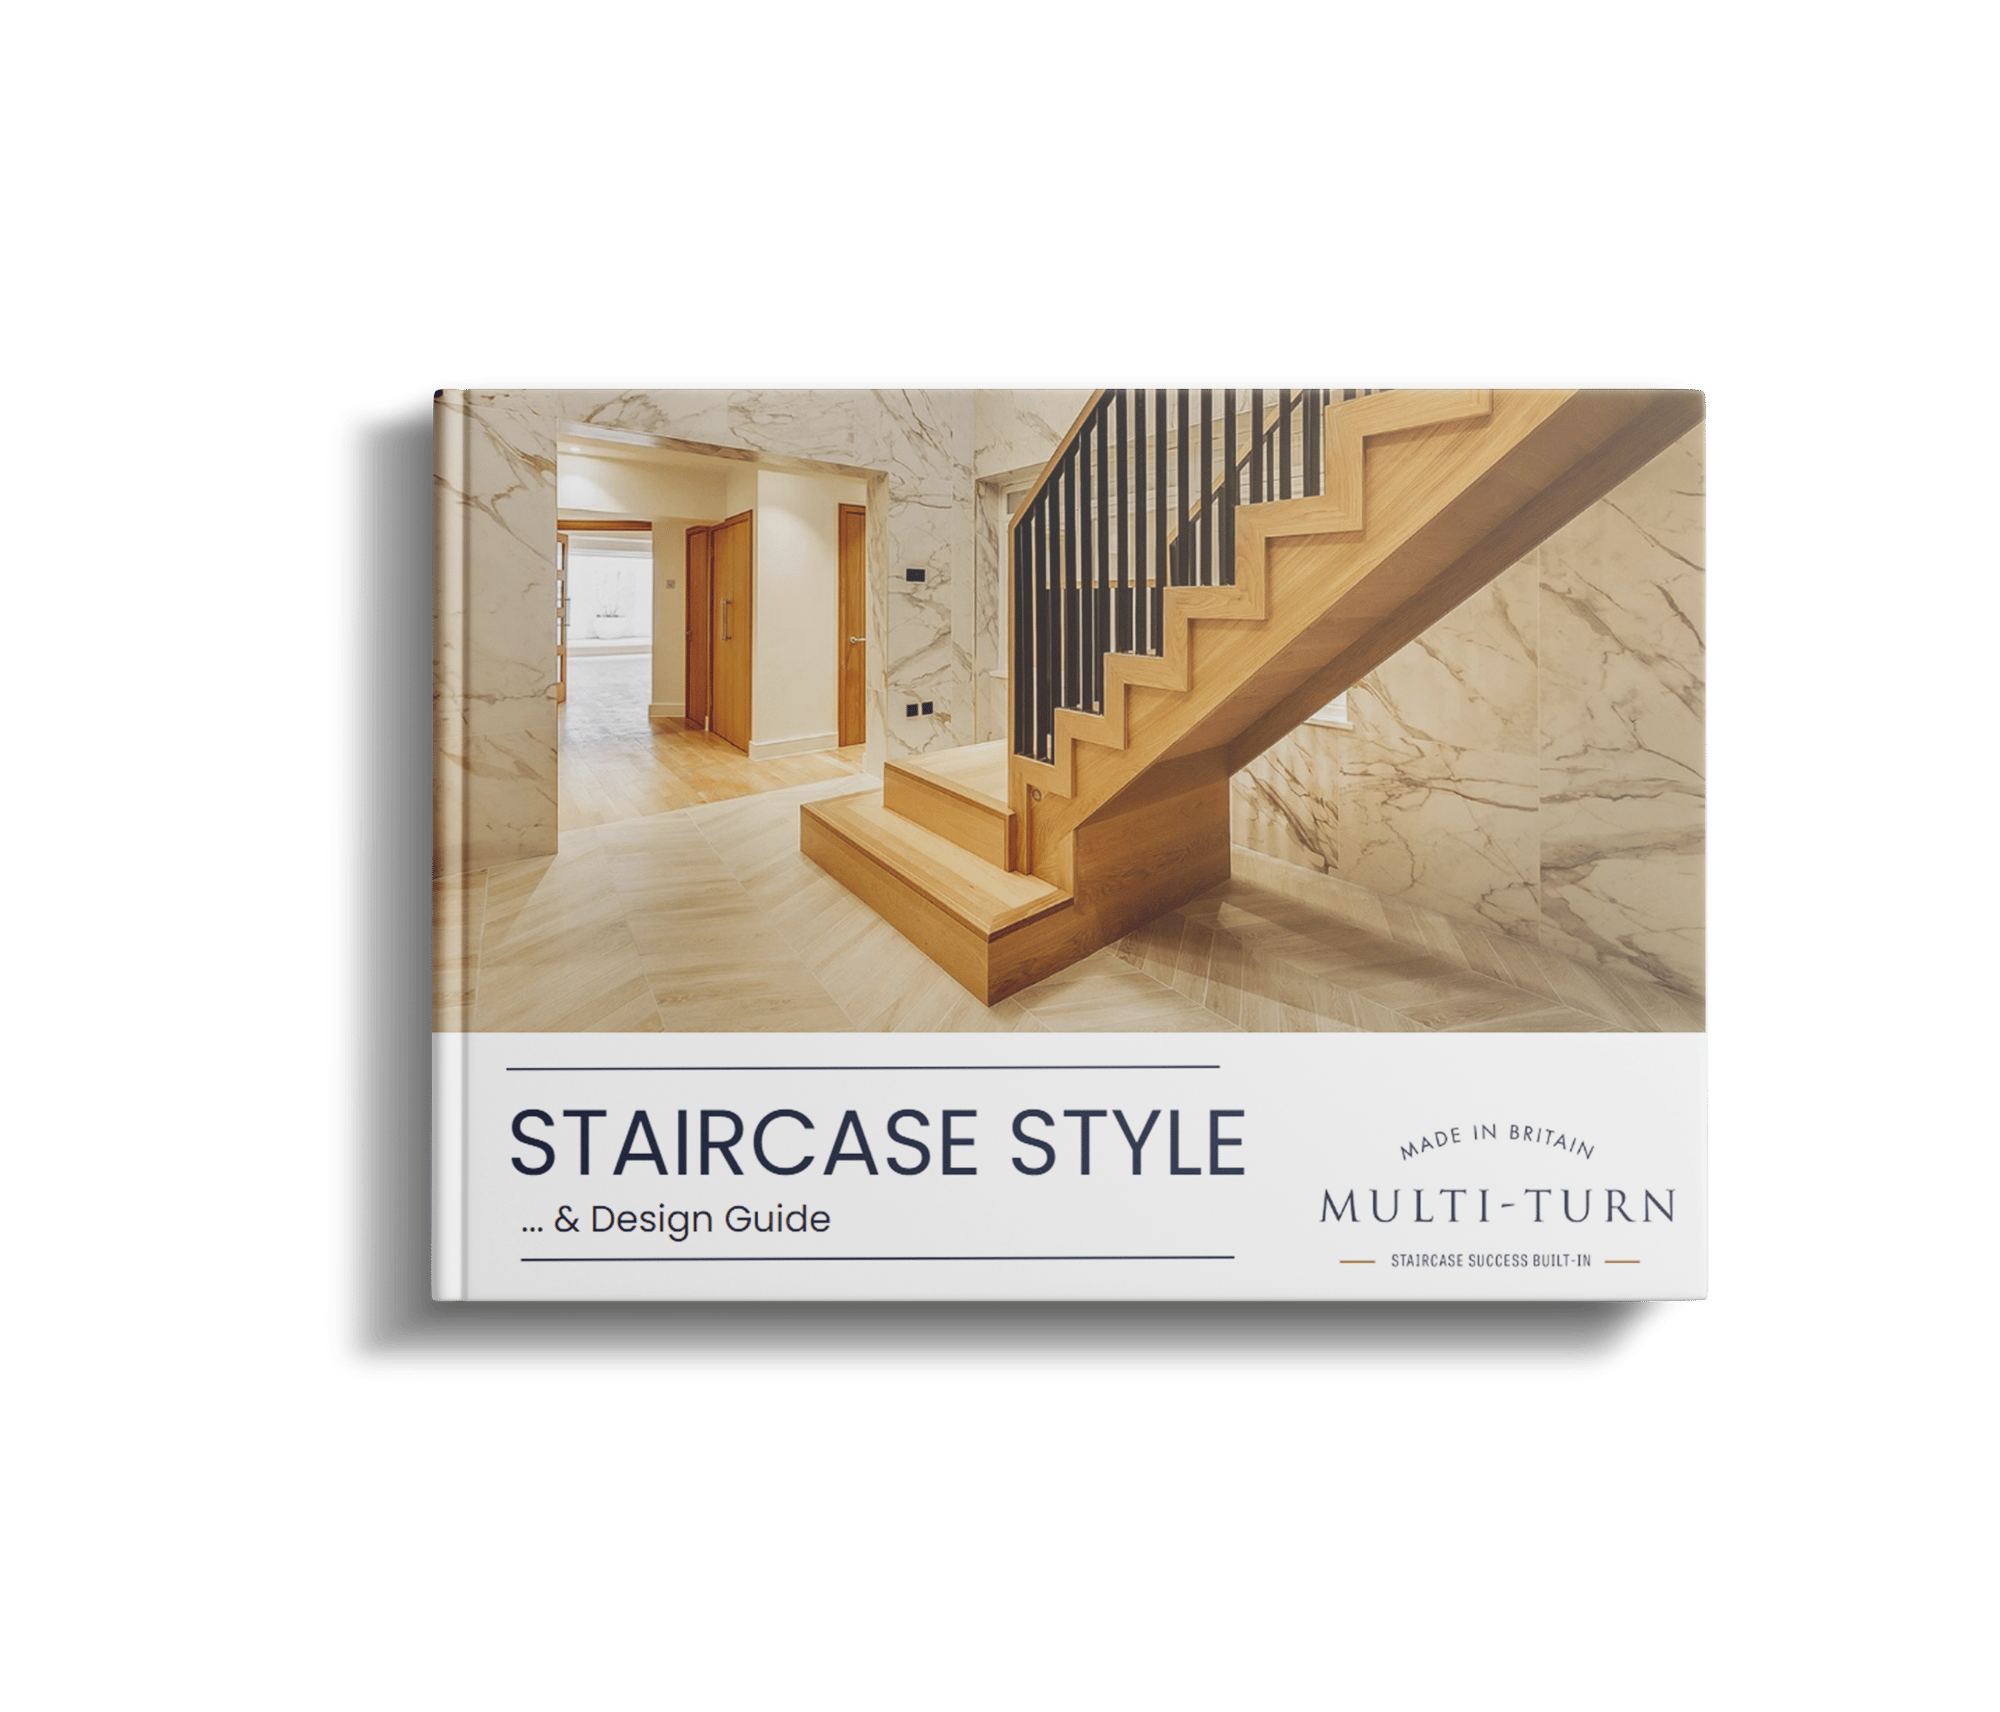 Staircase style and design guide